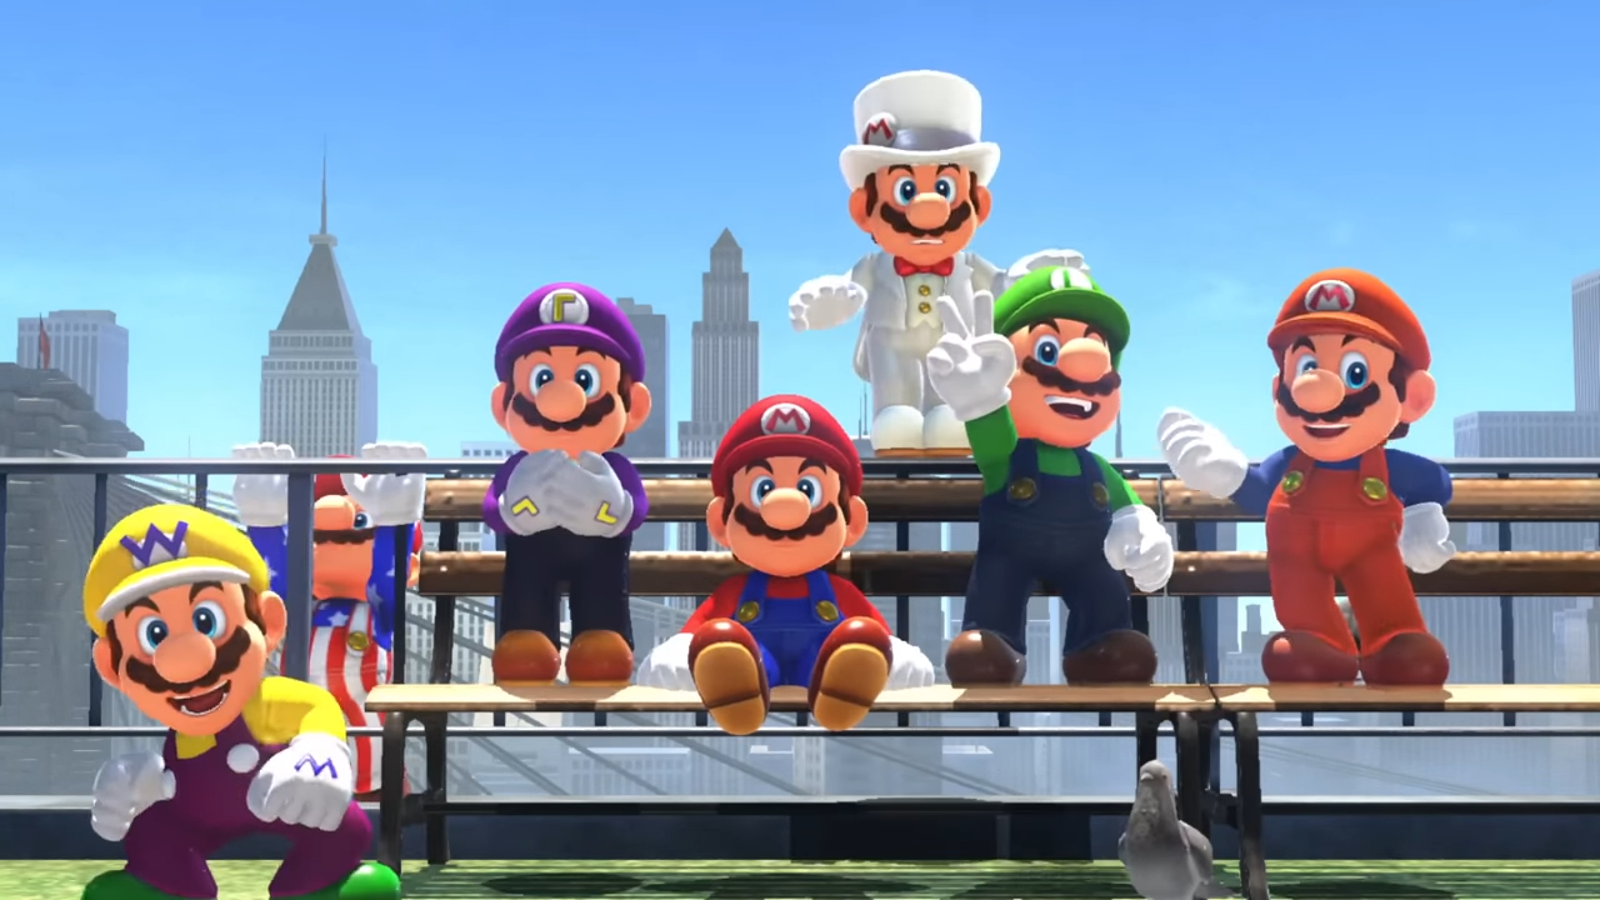 6 Mario games to play after seeing the Mario movie